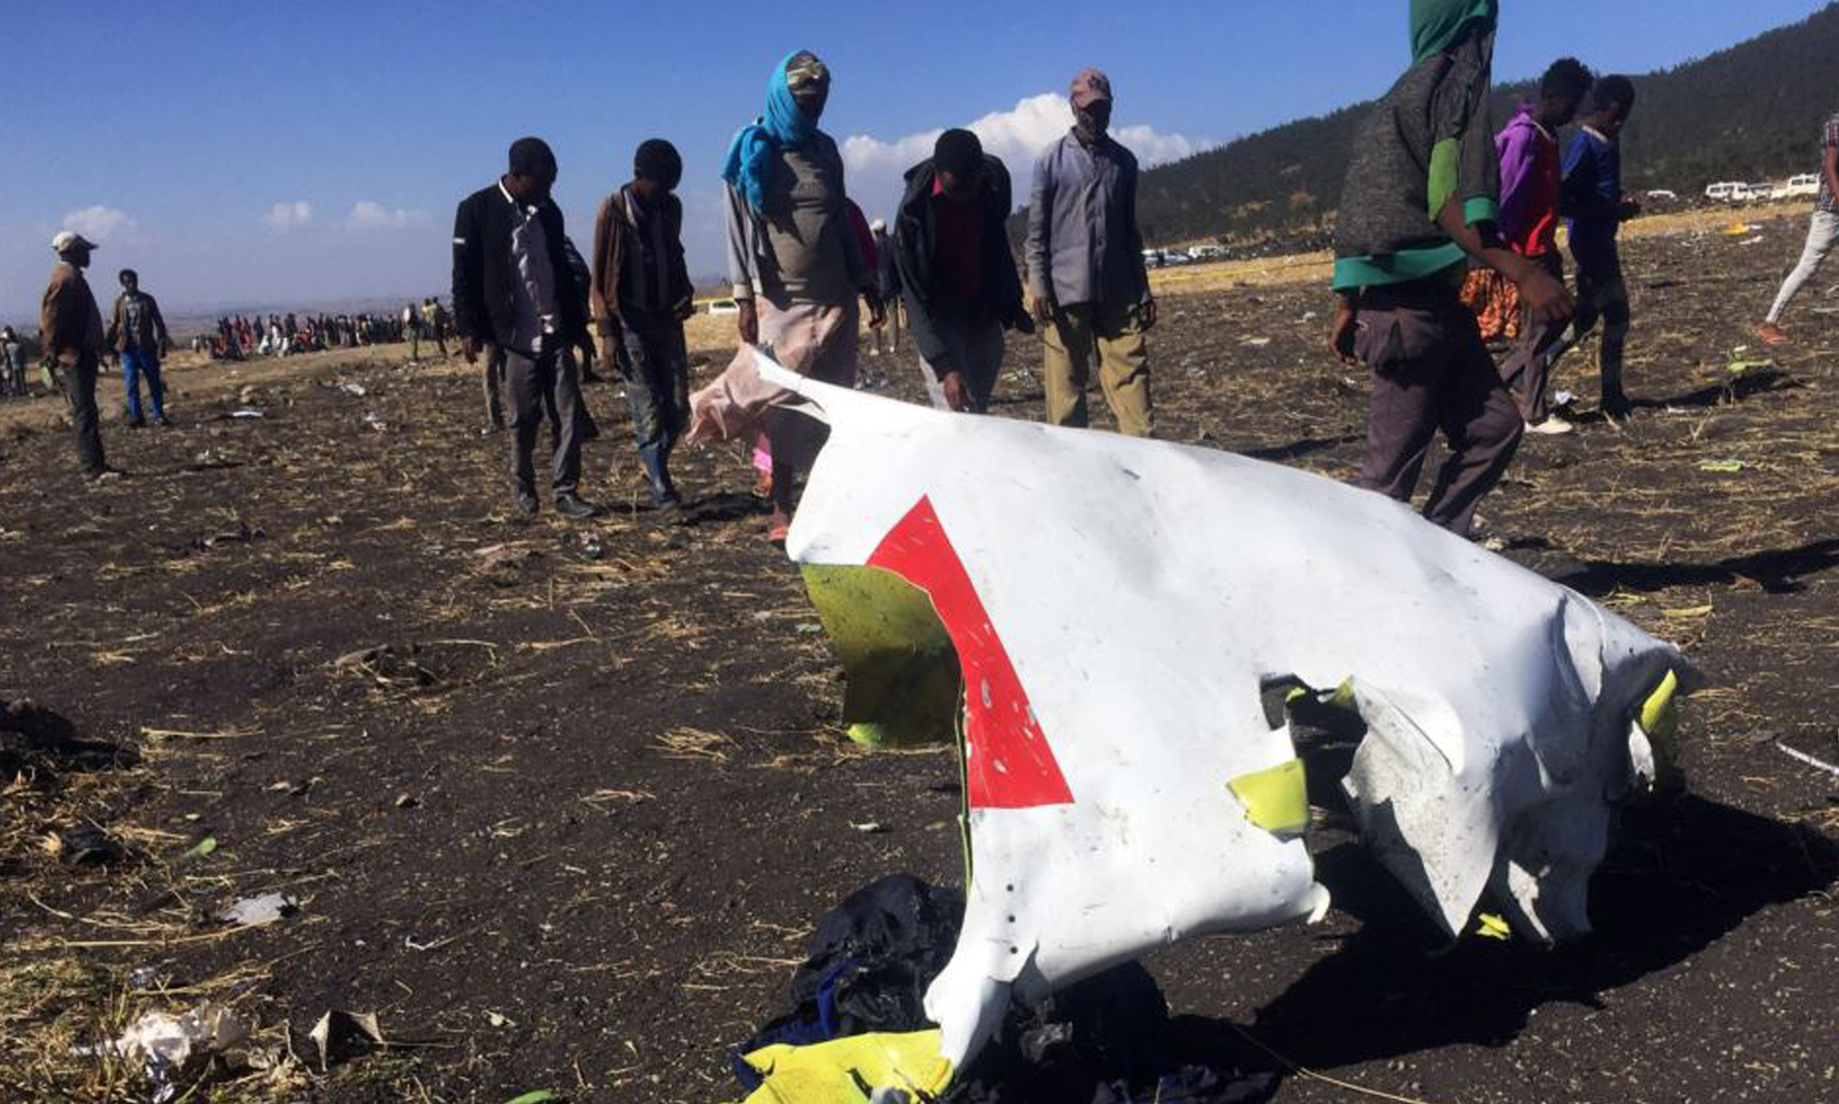 Udate: Ethiopian Airlines grounds its Boeing 737 MAX 8 fleet